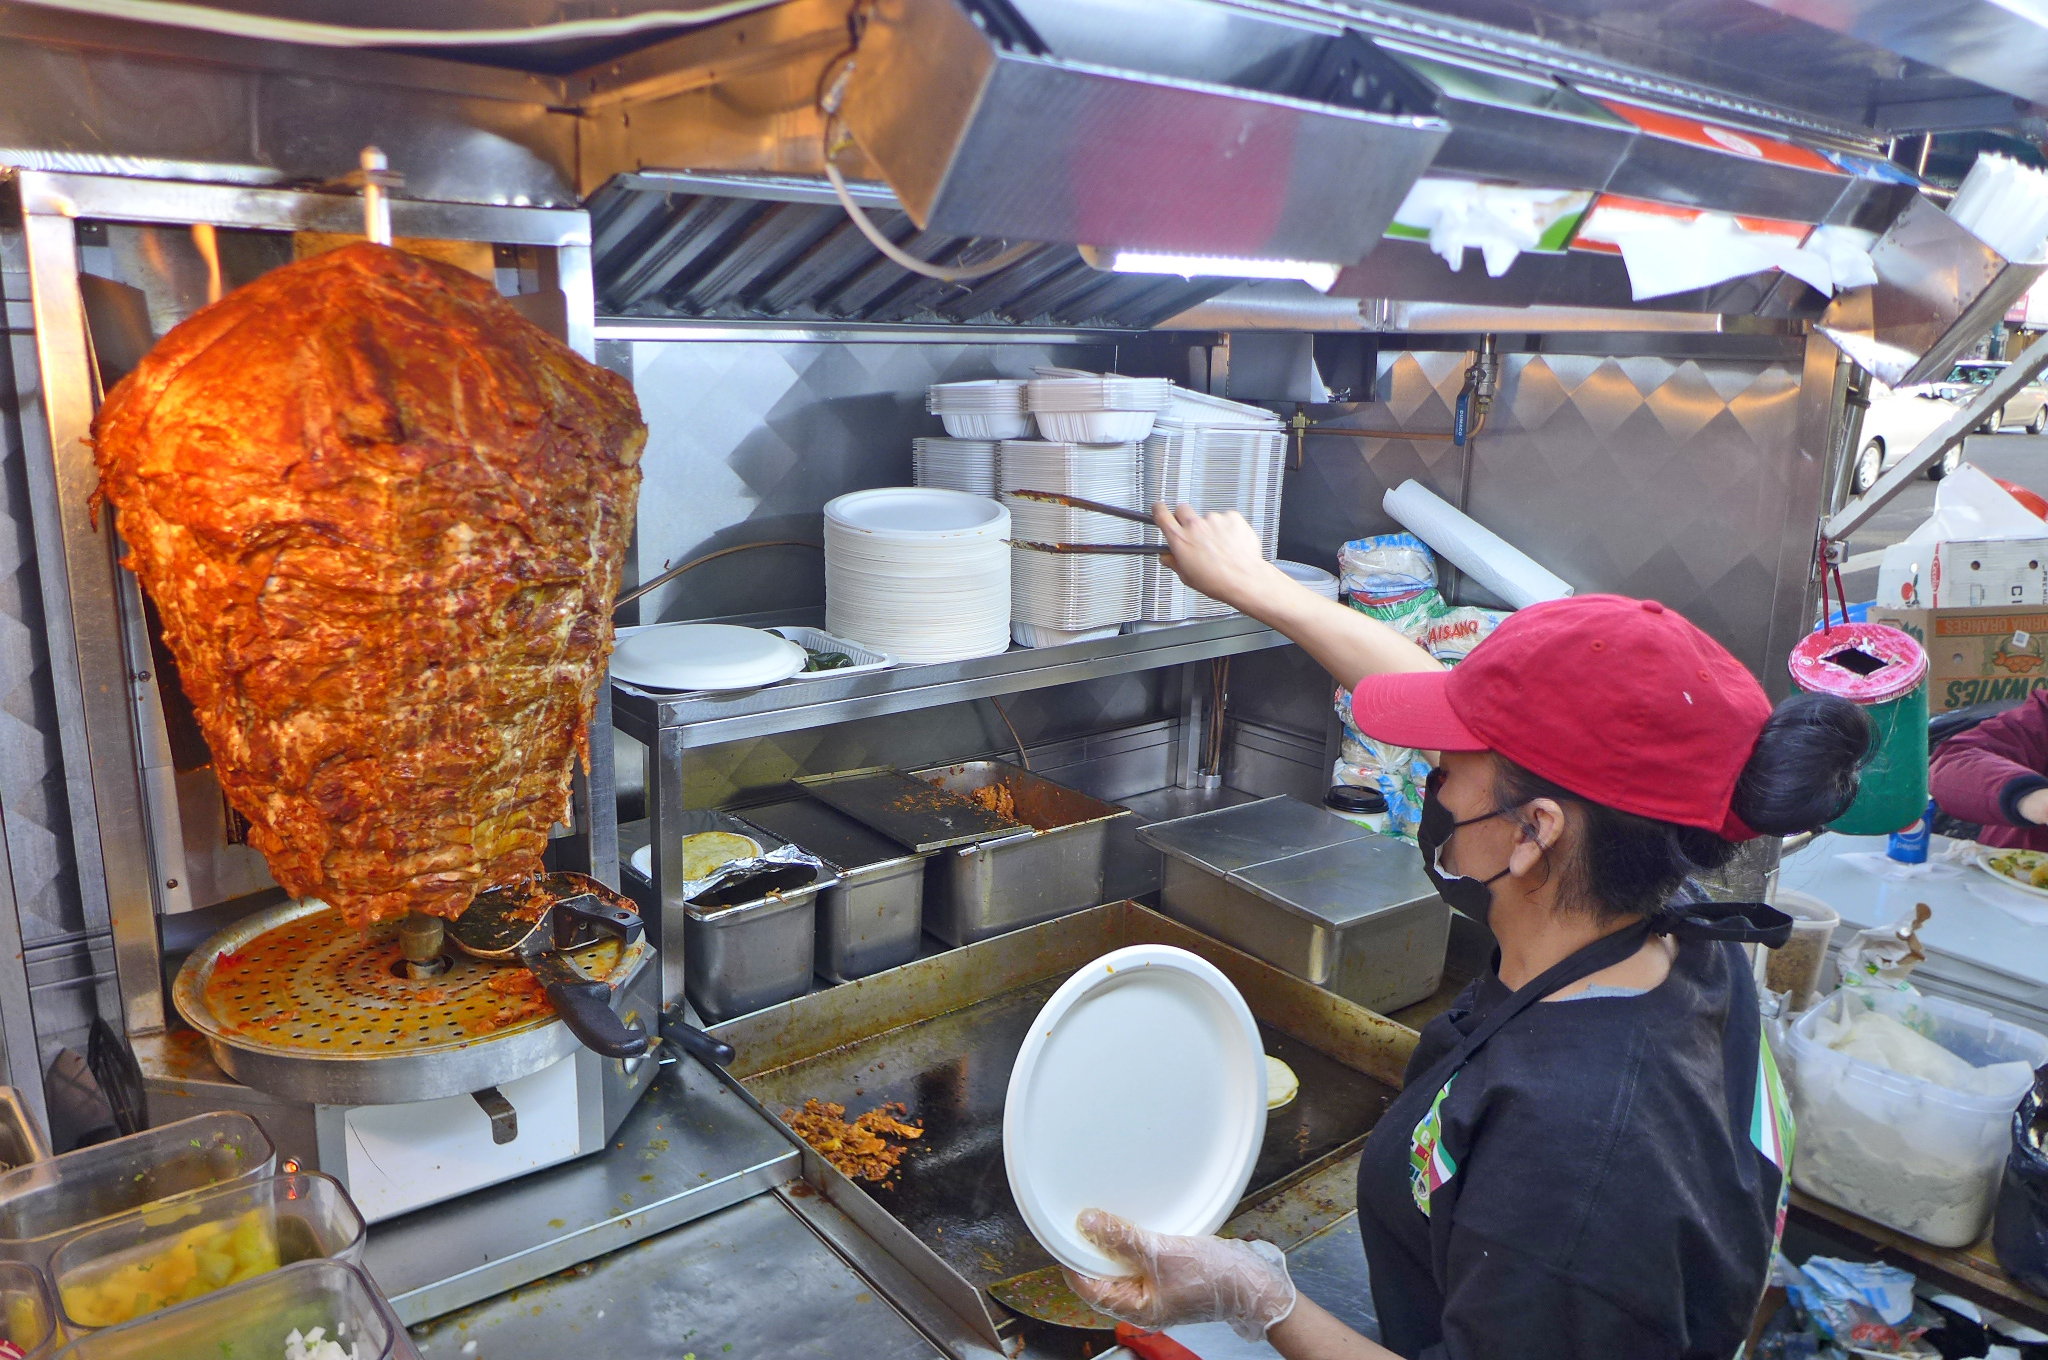 A big tapered cylinder of pork al pastor with a red-hatted lady in the foreground wielding tongs.